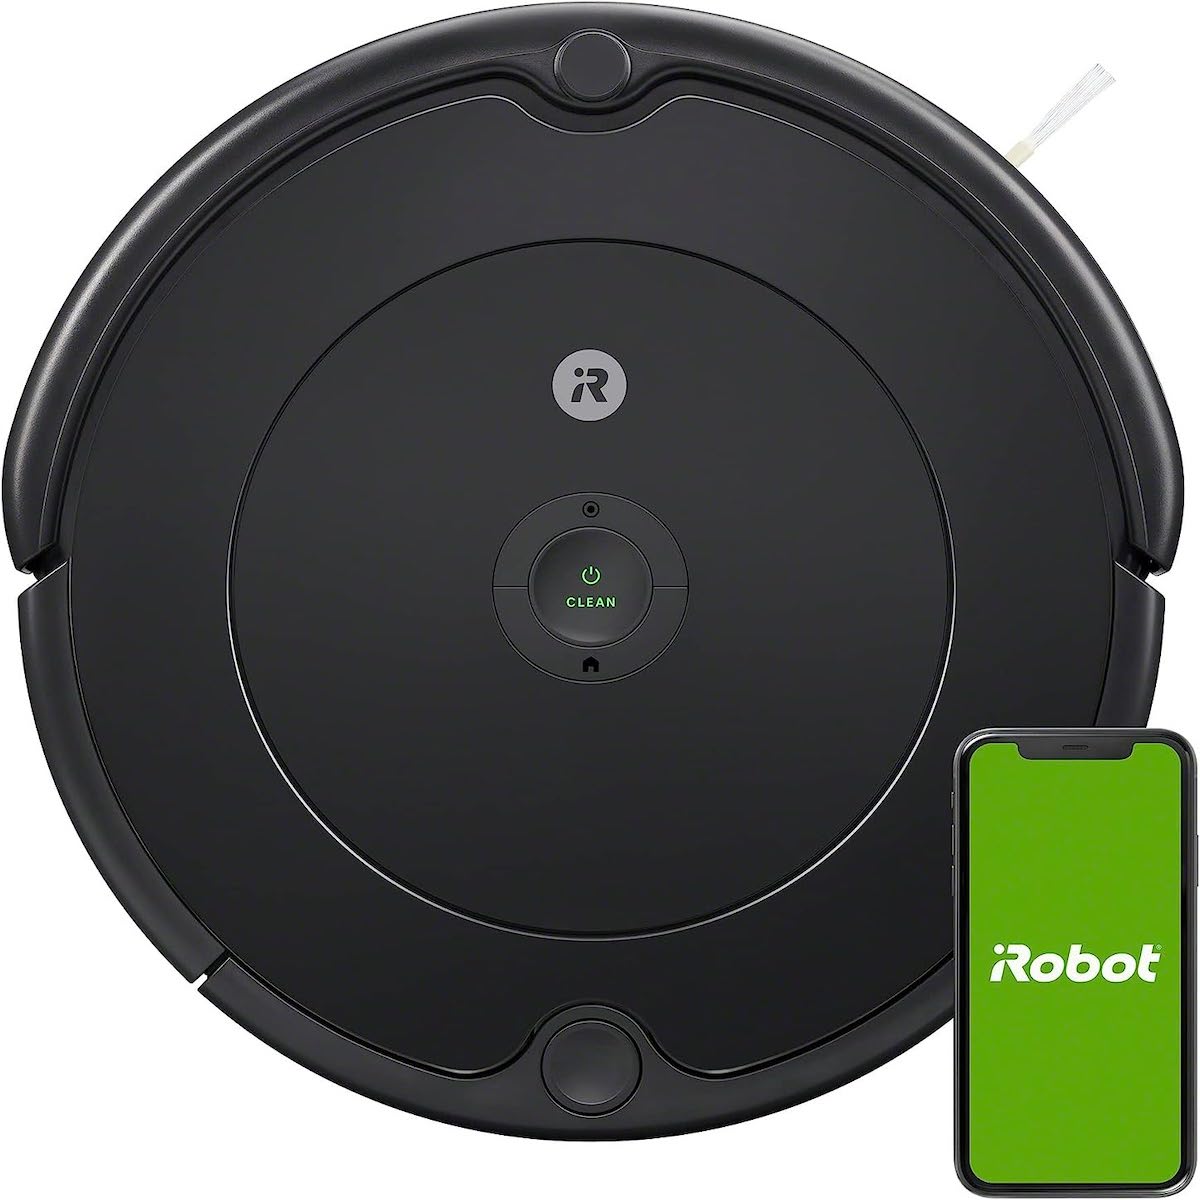 The iRobot Roomba 692 Robot Vacuum and a smart phone with a green-colored screen that says "iRobot" in white text with a blank white background.